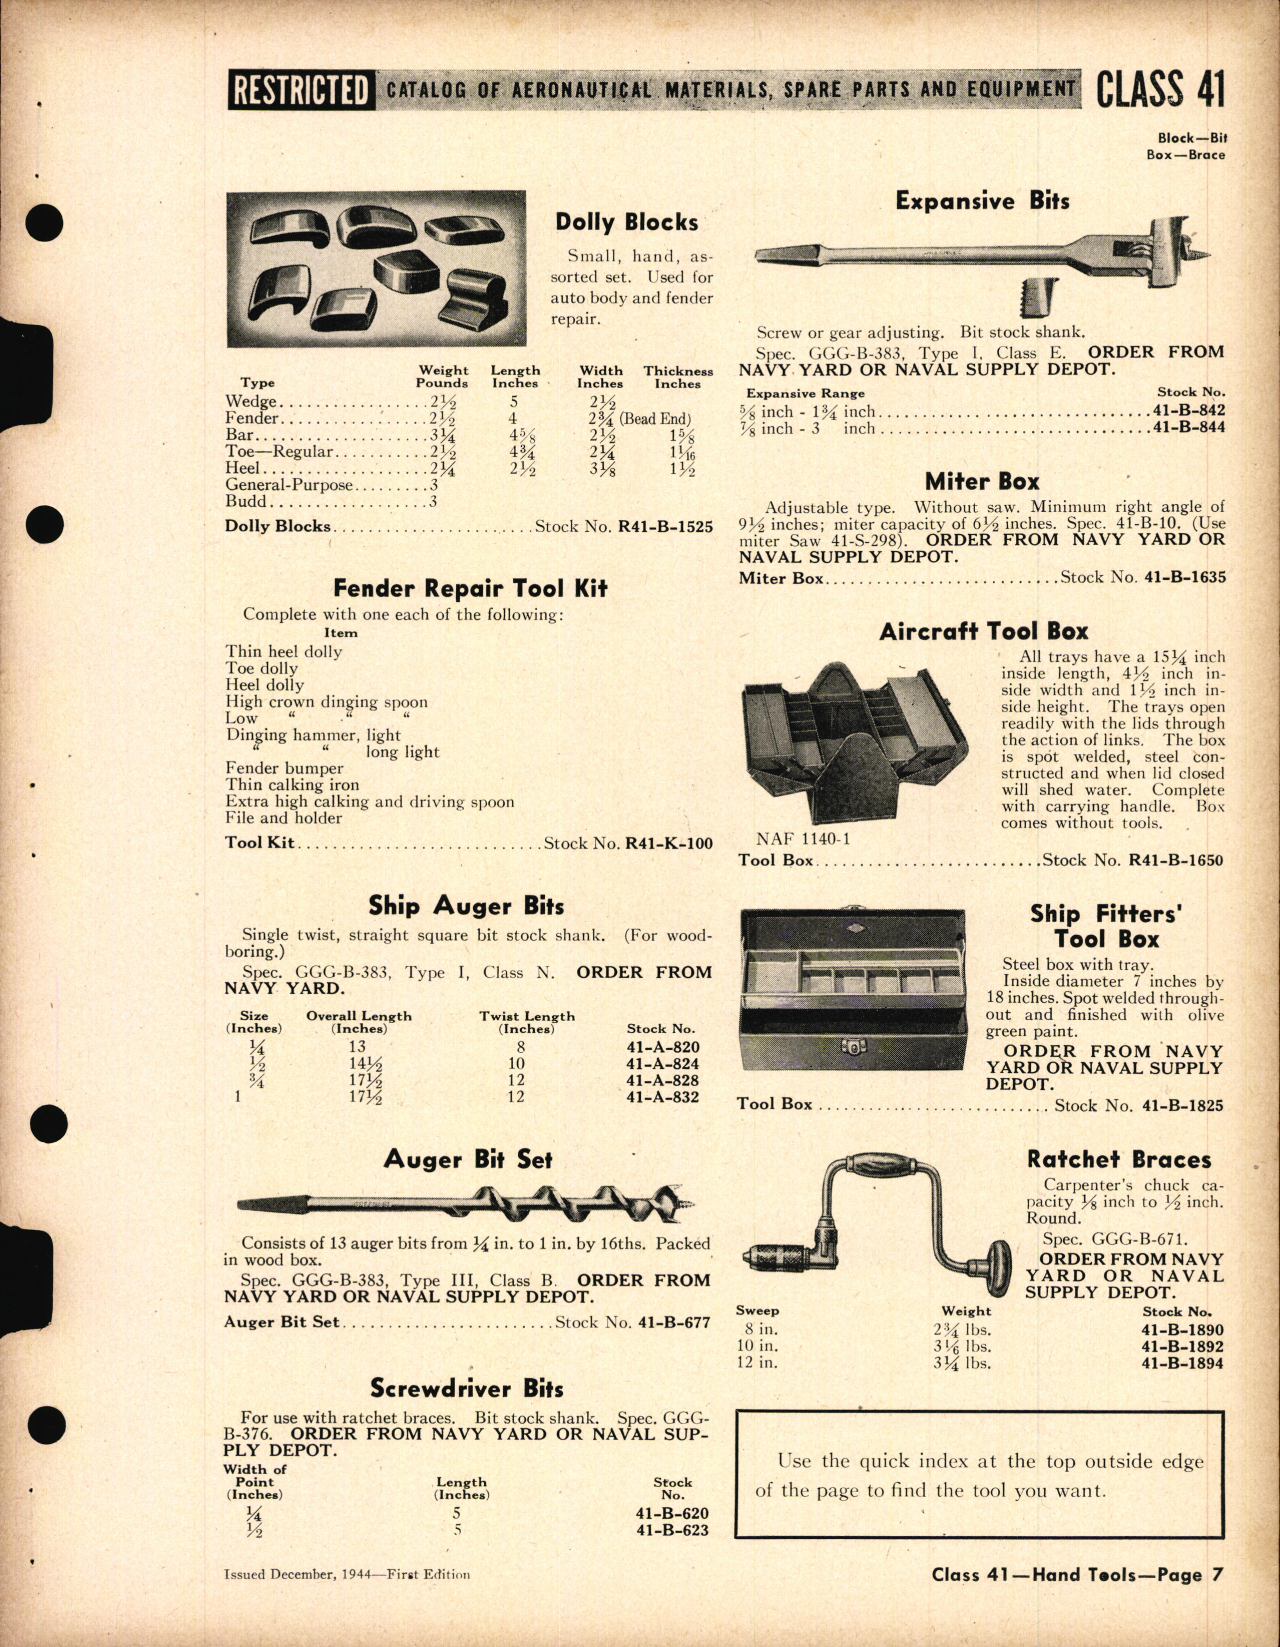 Sample page 7 from AirCorps Library document: Hand Tools